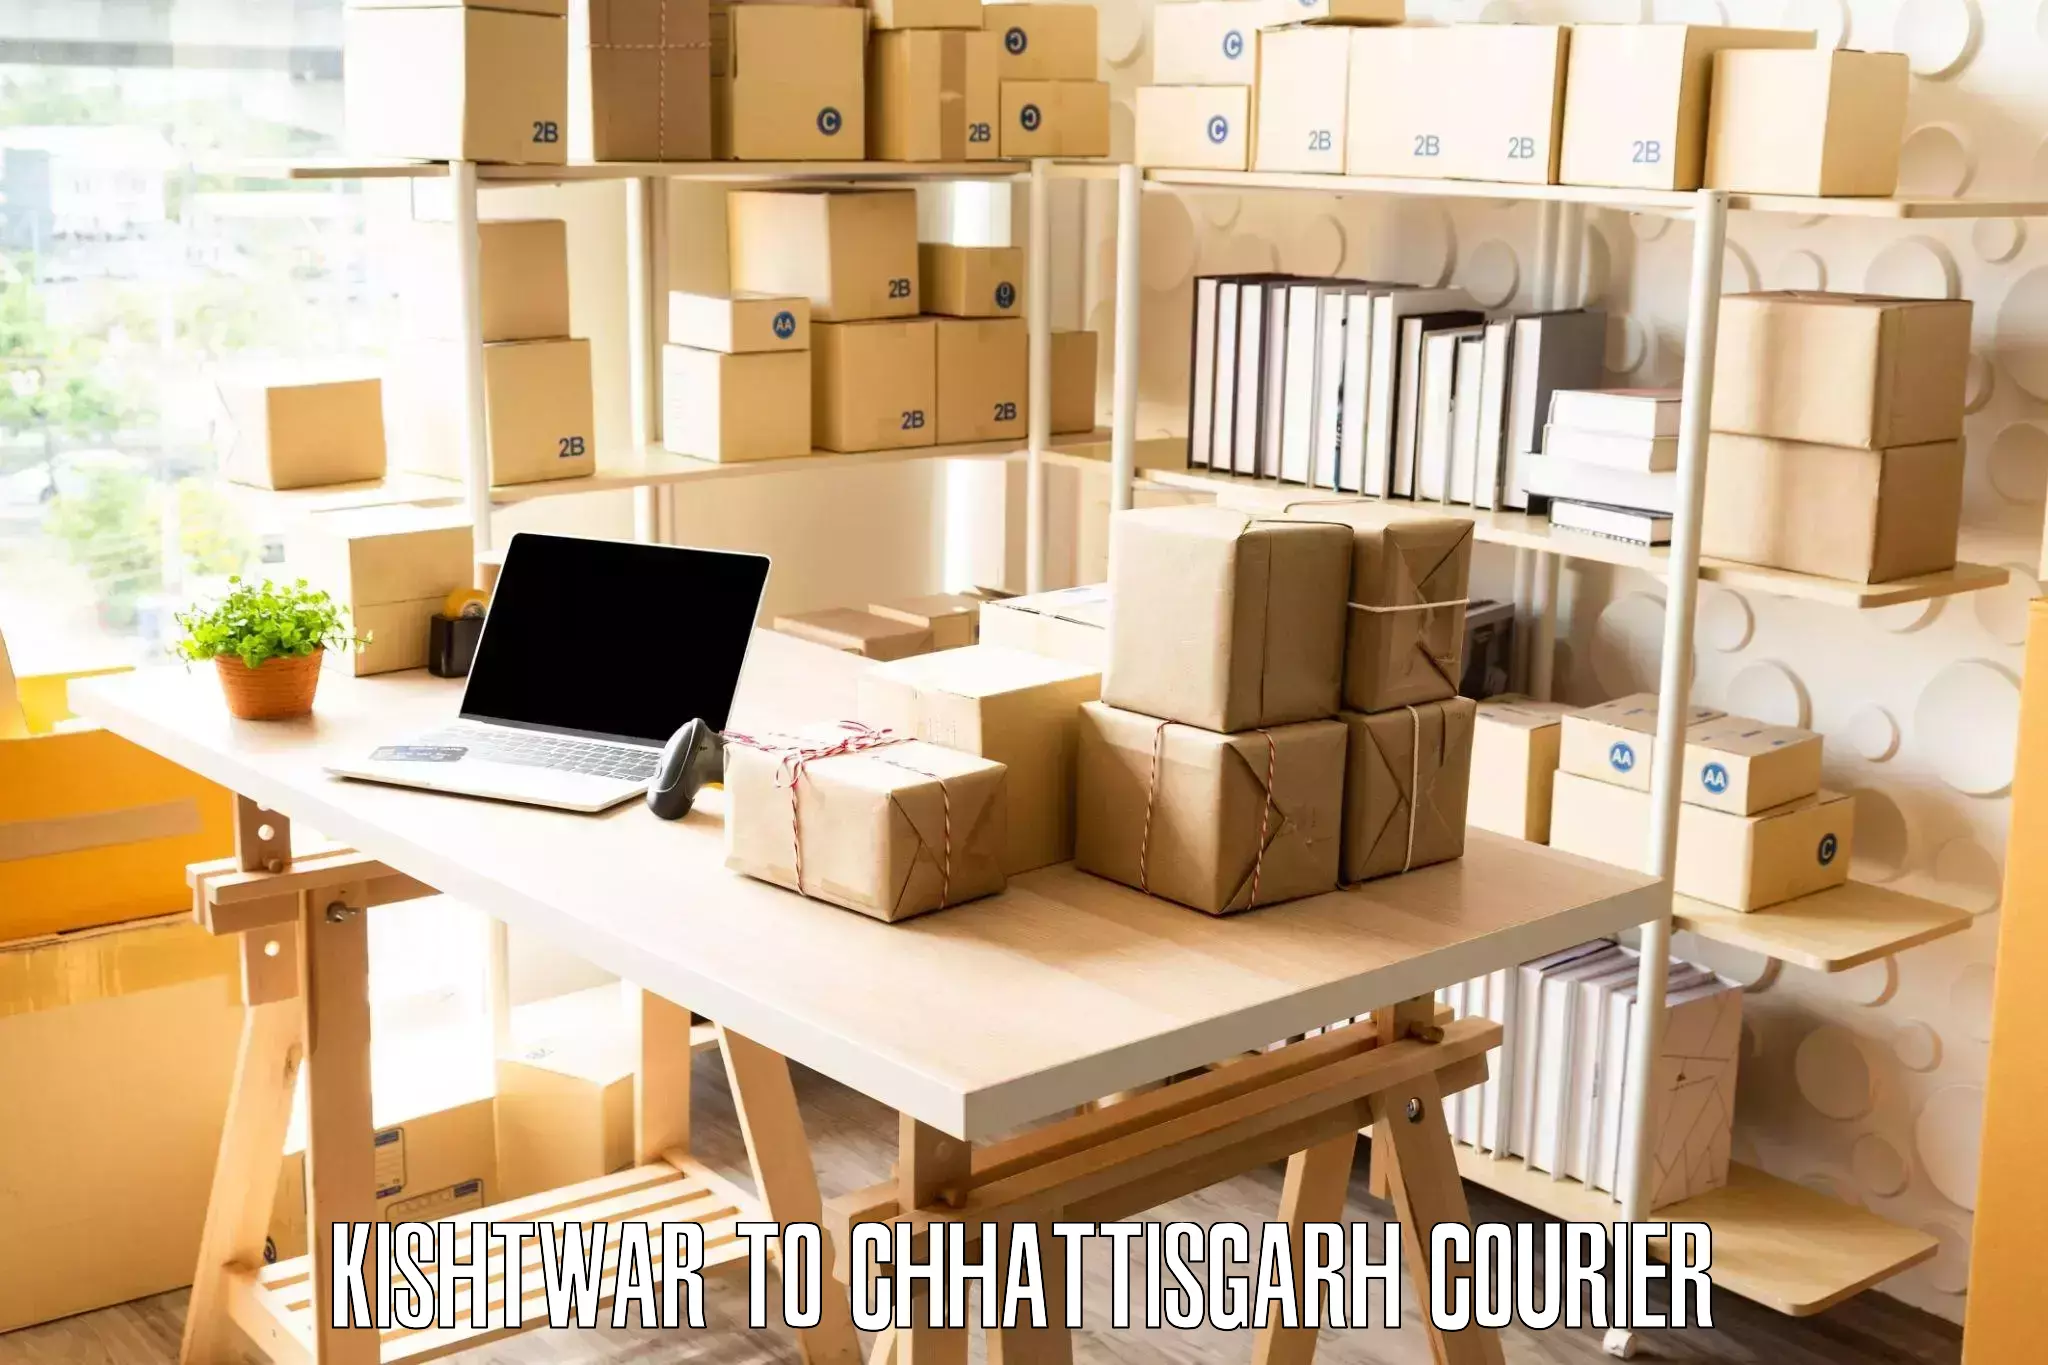 Moving and packing experts in Kishtwar to Chhattisgarh